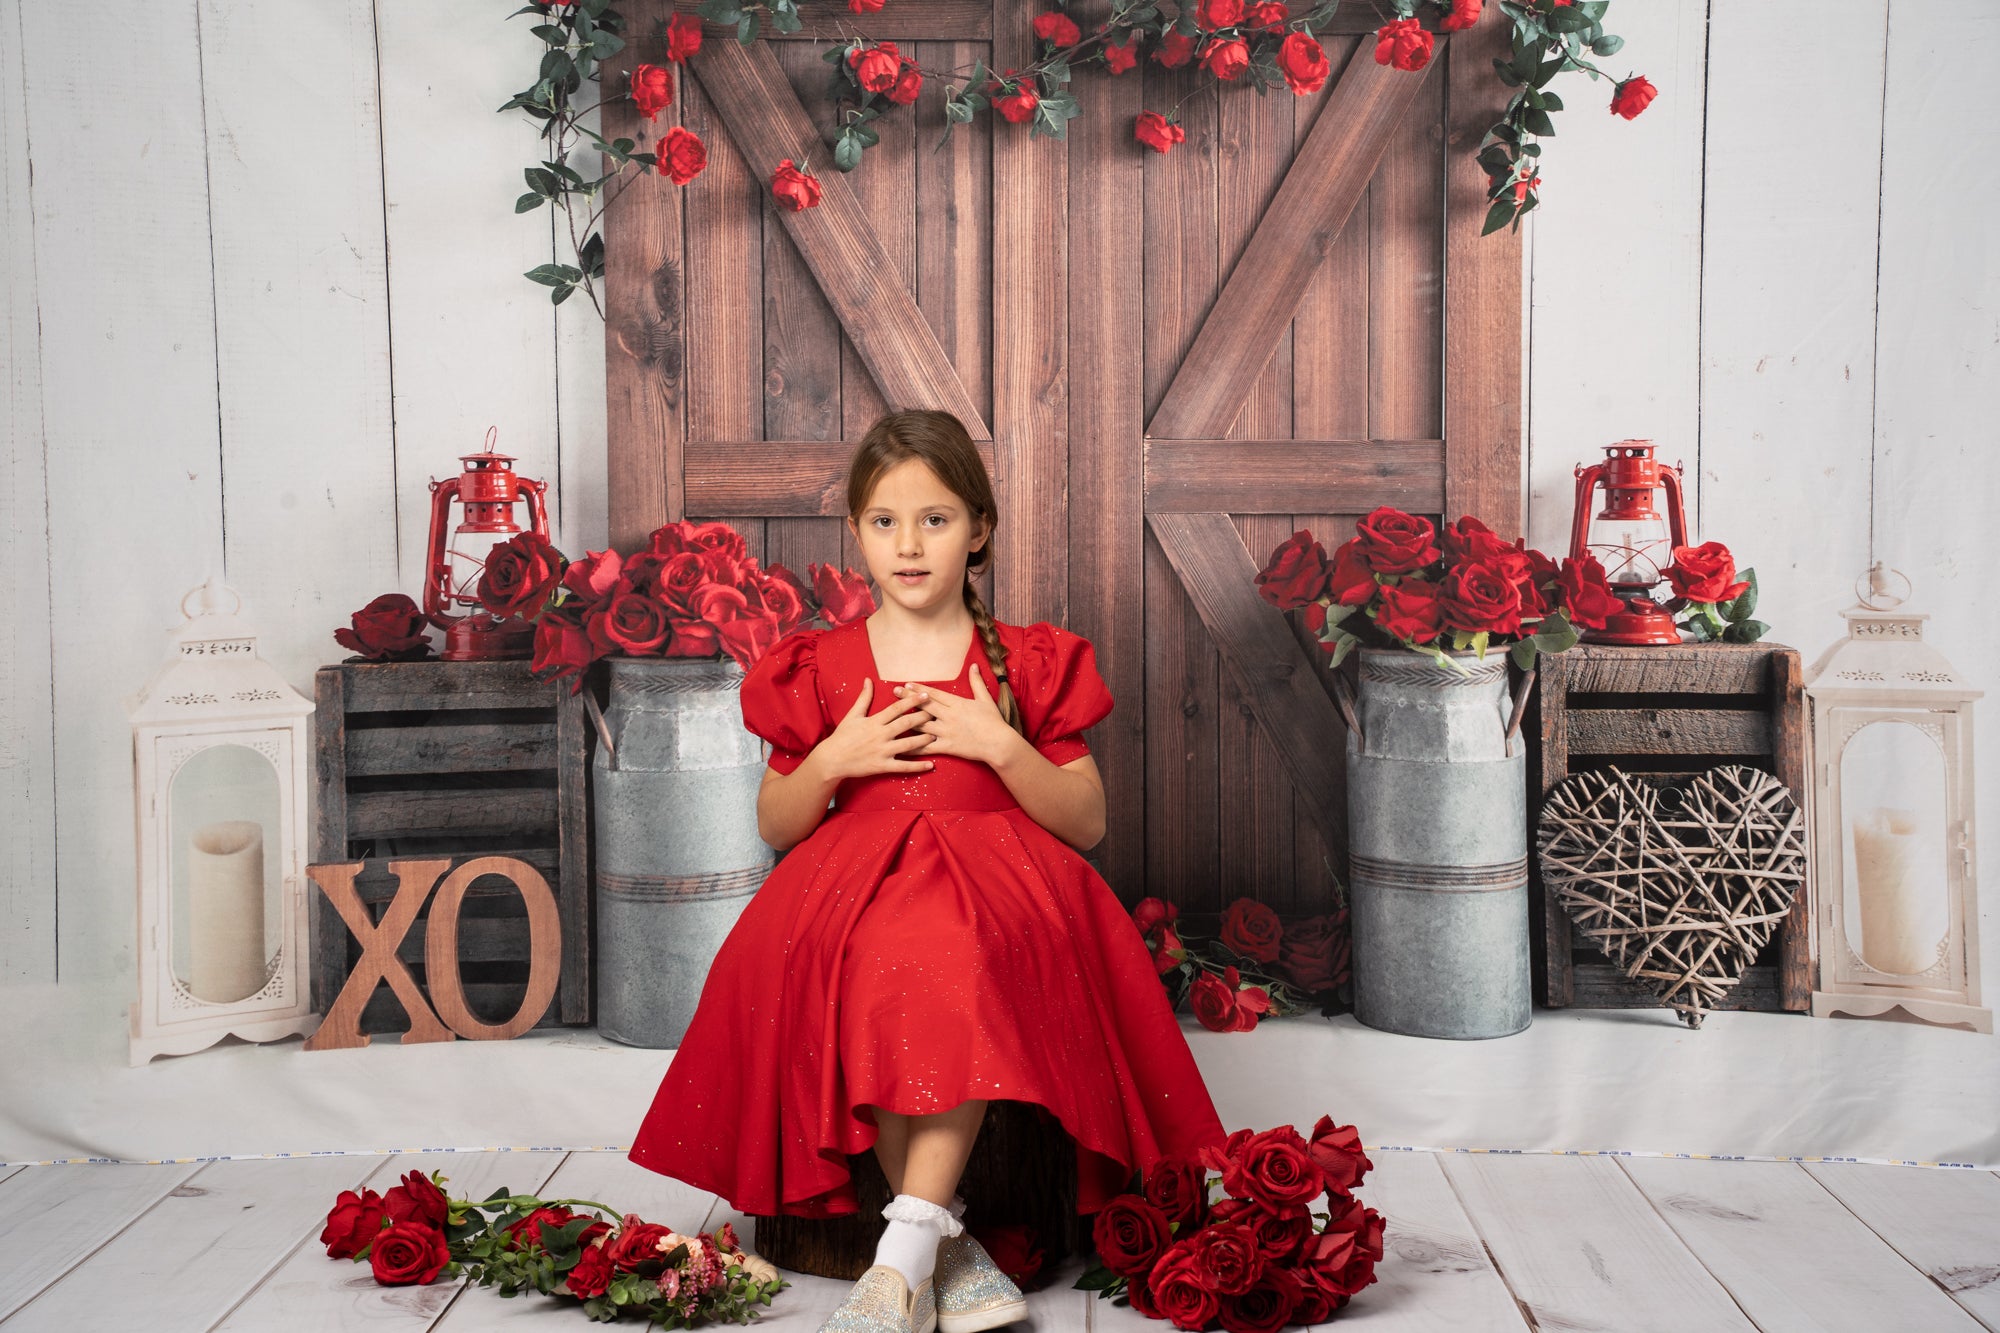 Kate Valentine's Day Barn Door Rose Backdrop for Photography